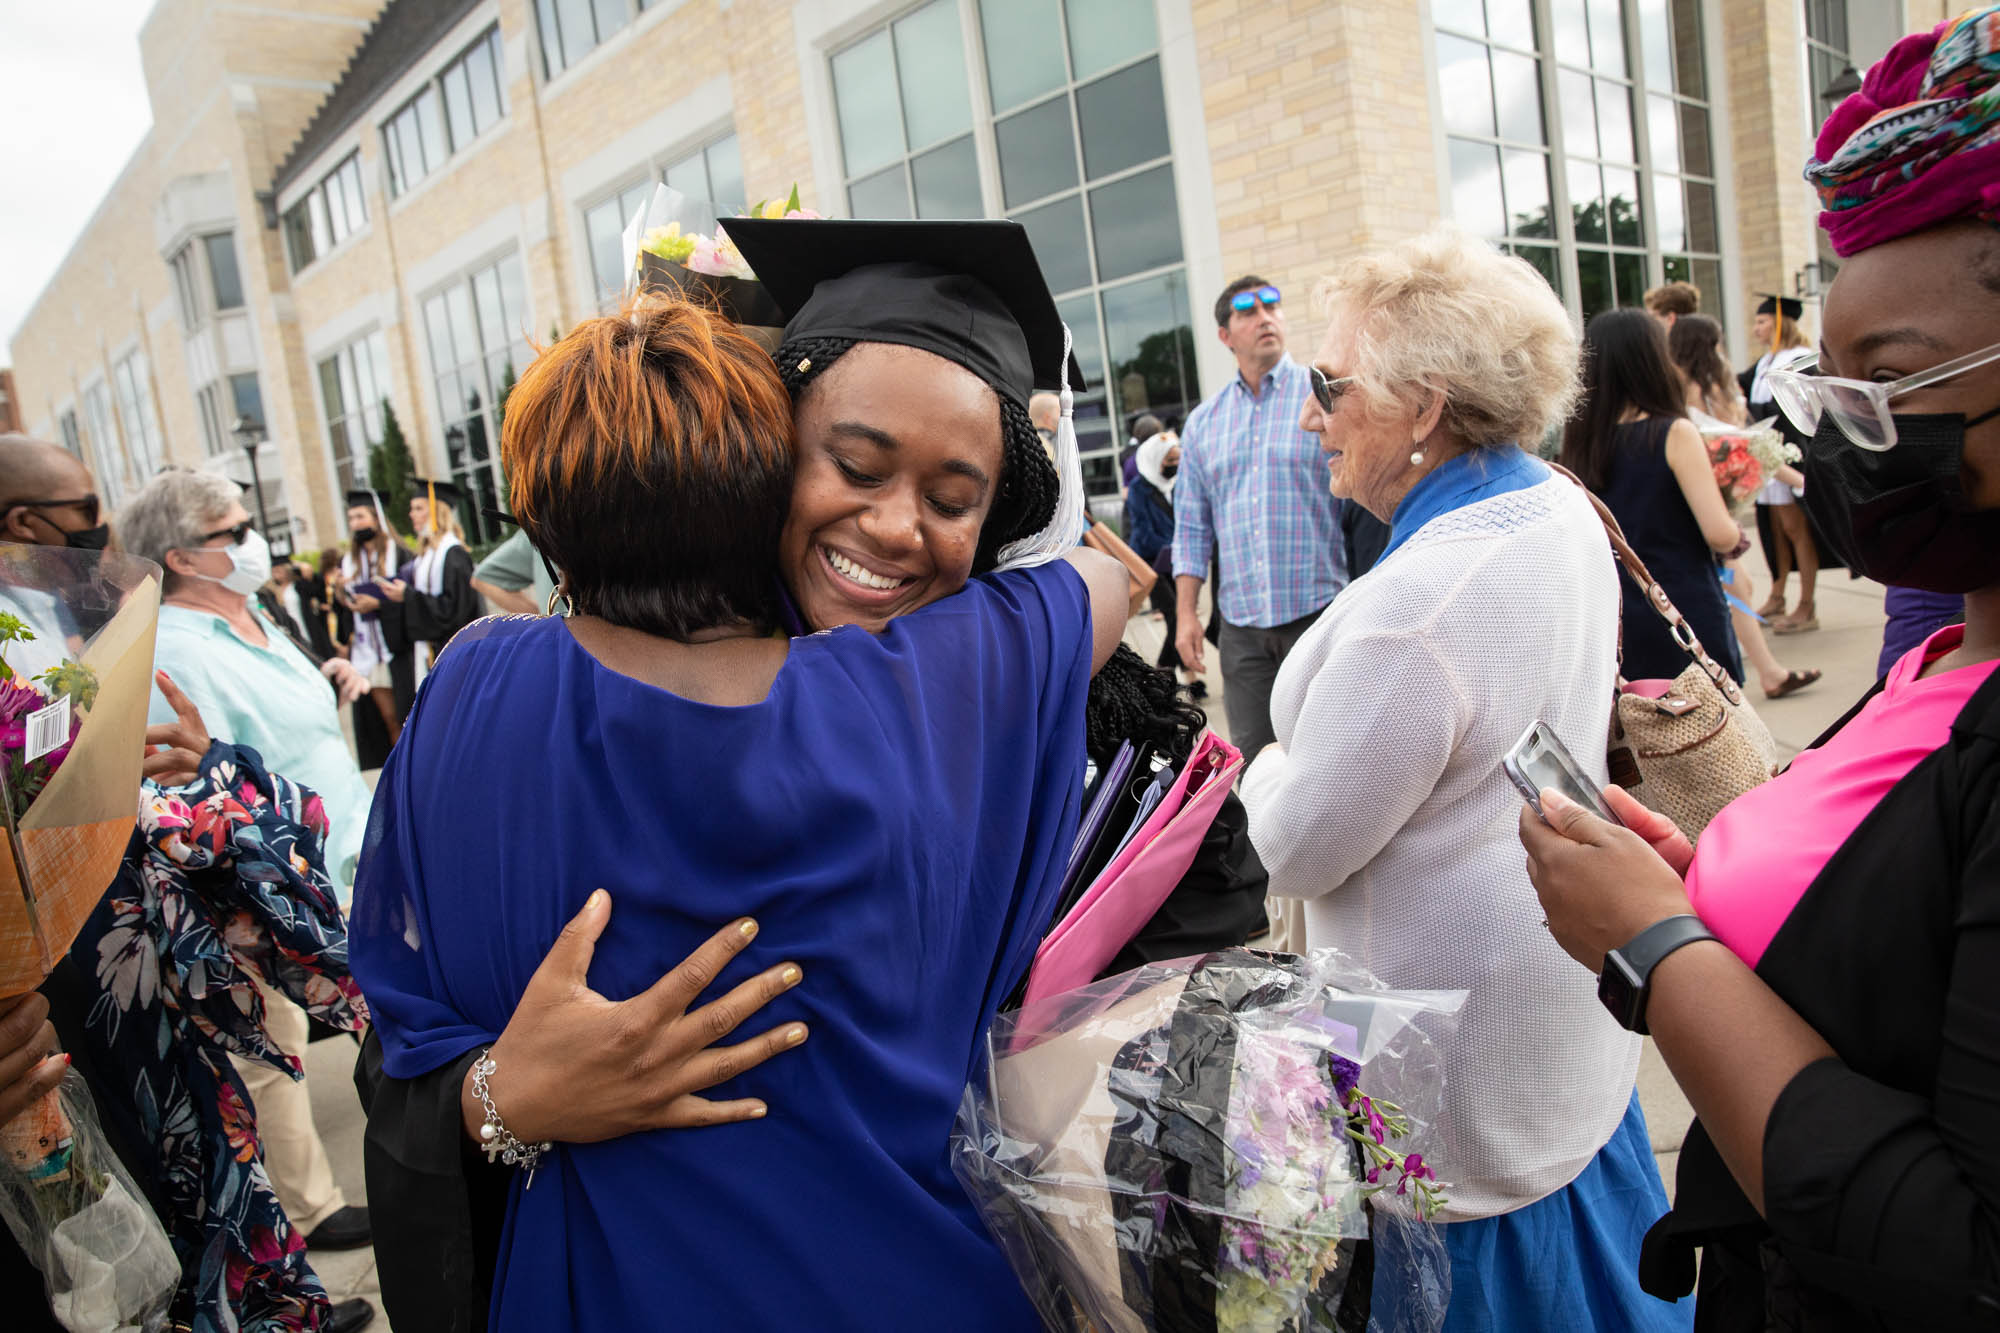 Deja Copeland, student speaker for the College of Arts and Sciences commencement, hugs a family member after the ceremony in St. Paul on May 22, 2021.